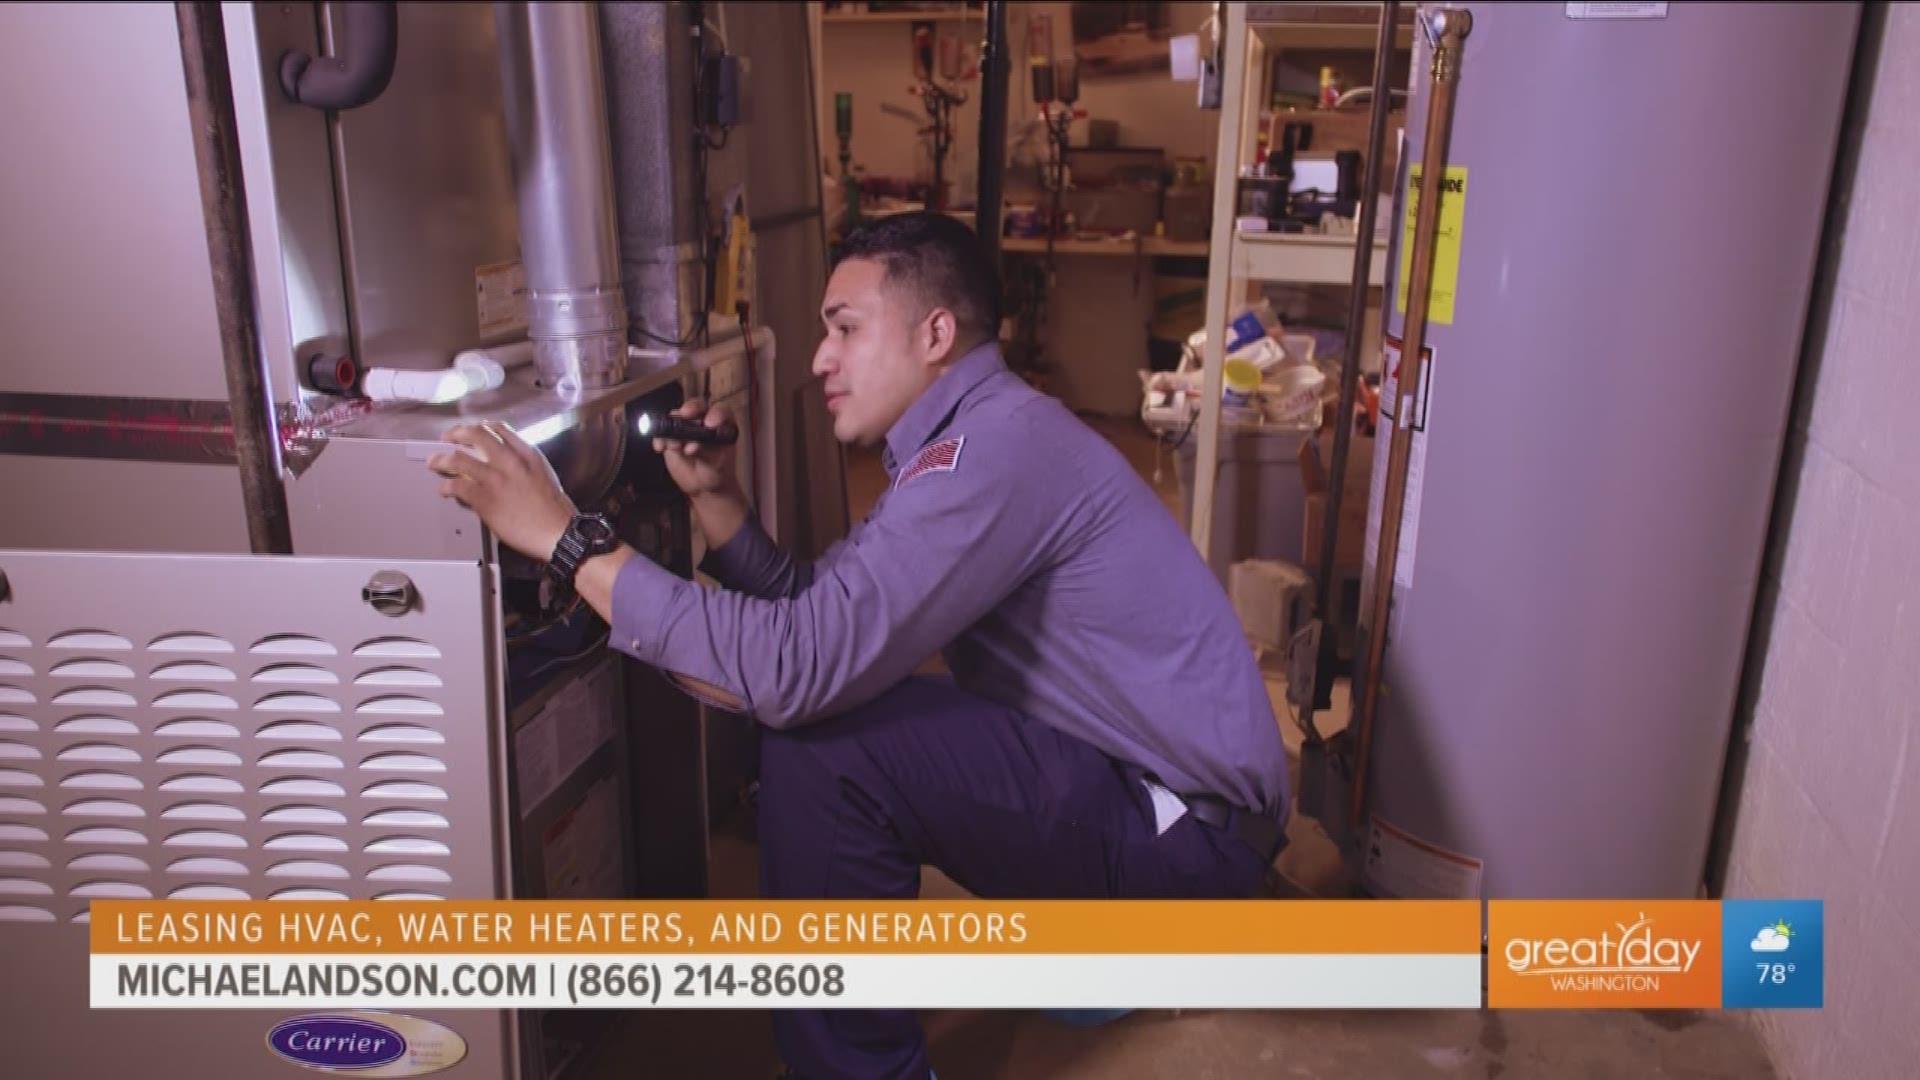 Brandon Viernes of Michael & Son explains why you should rent an HVAC system for your home instead of purchasing one. If you are in the need of leasing a new HVAC system, visit michaelandson.com or call (866)-214-8608.